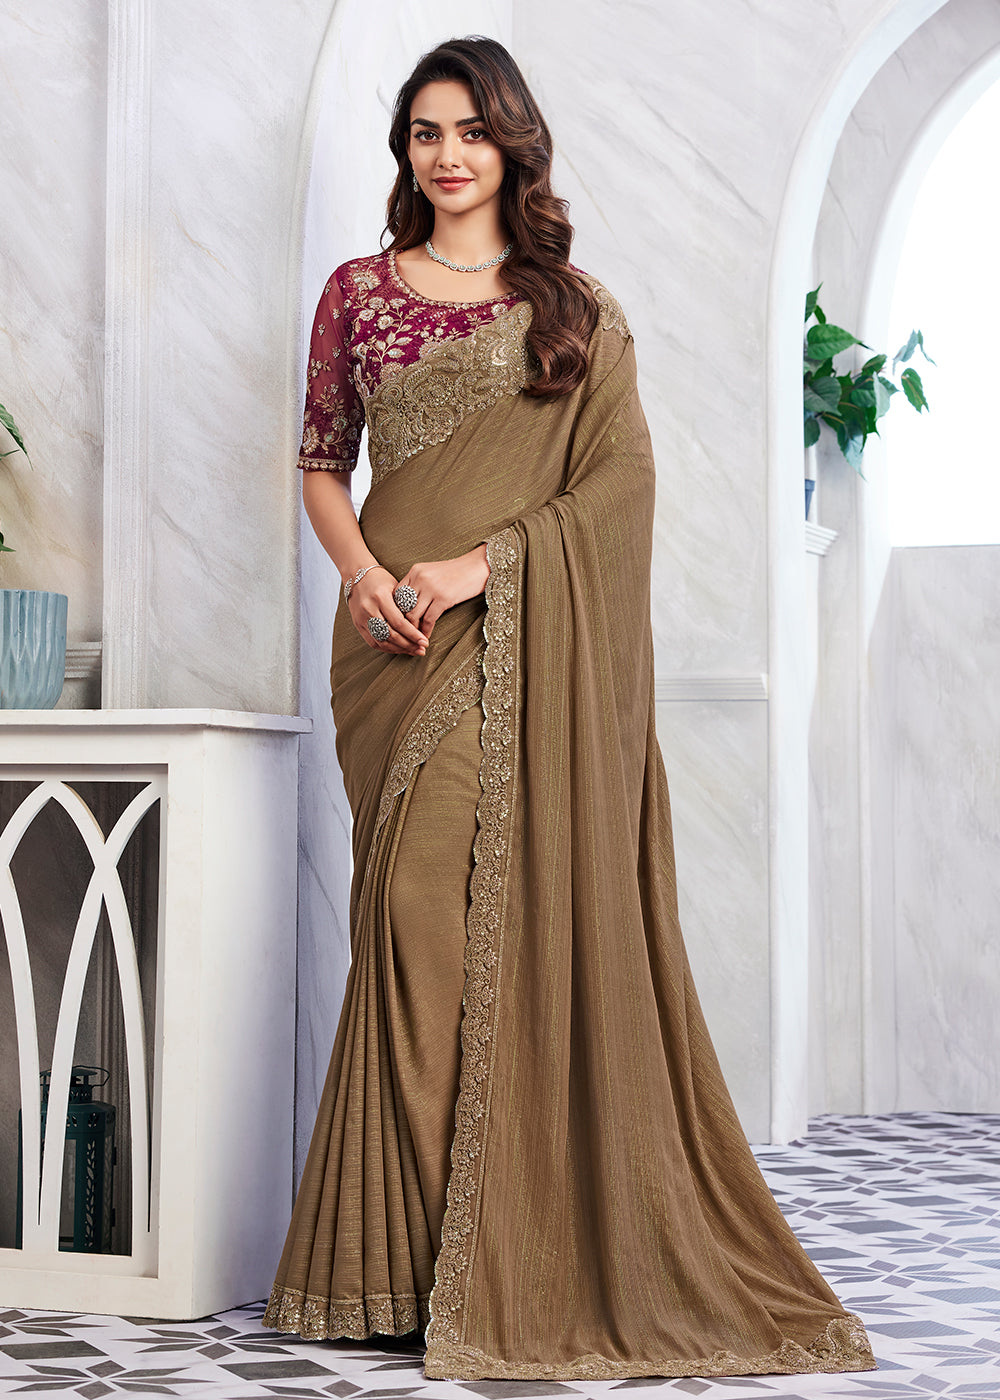 Buy Now Lovely Light Brown Silk Embroidered Designer Saree Online in USA, UK, Canada & Worldwide at Empress Clothing.